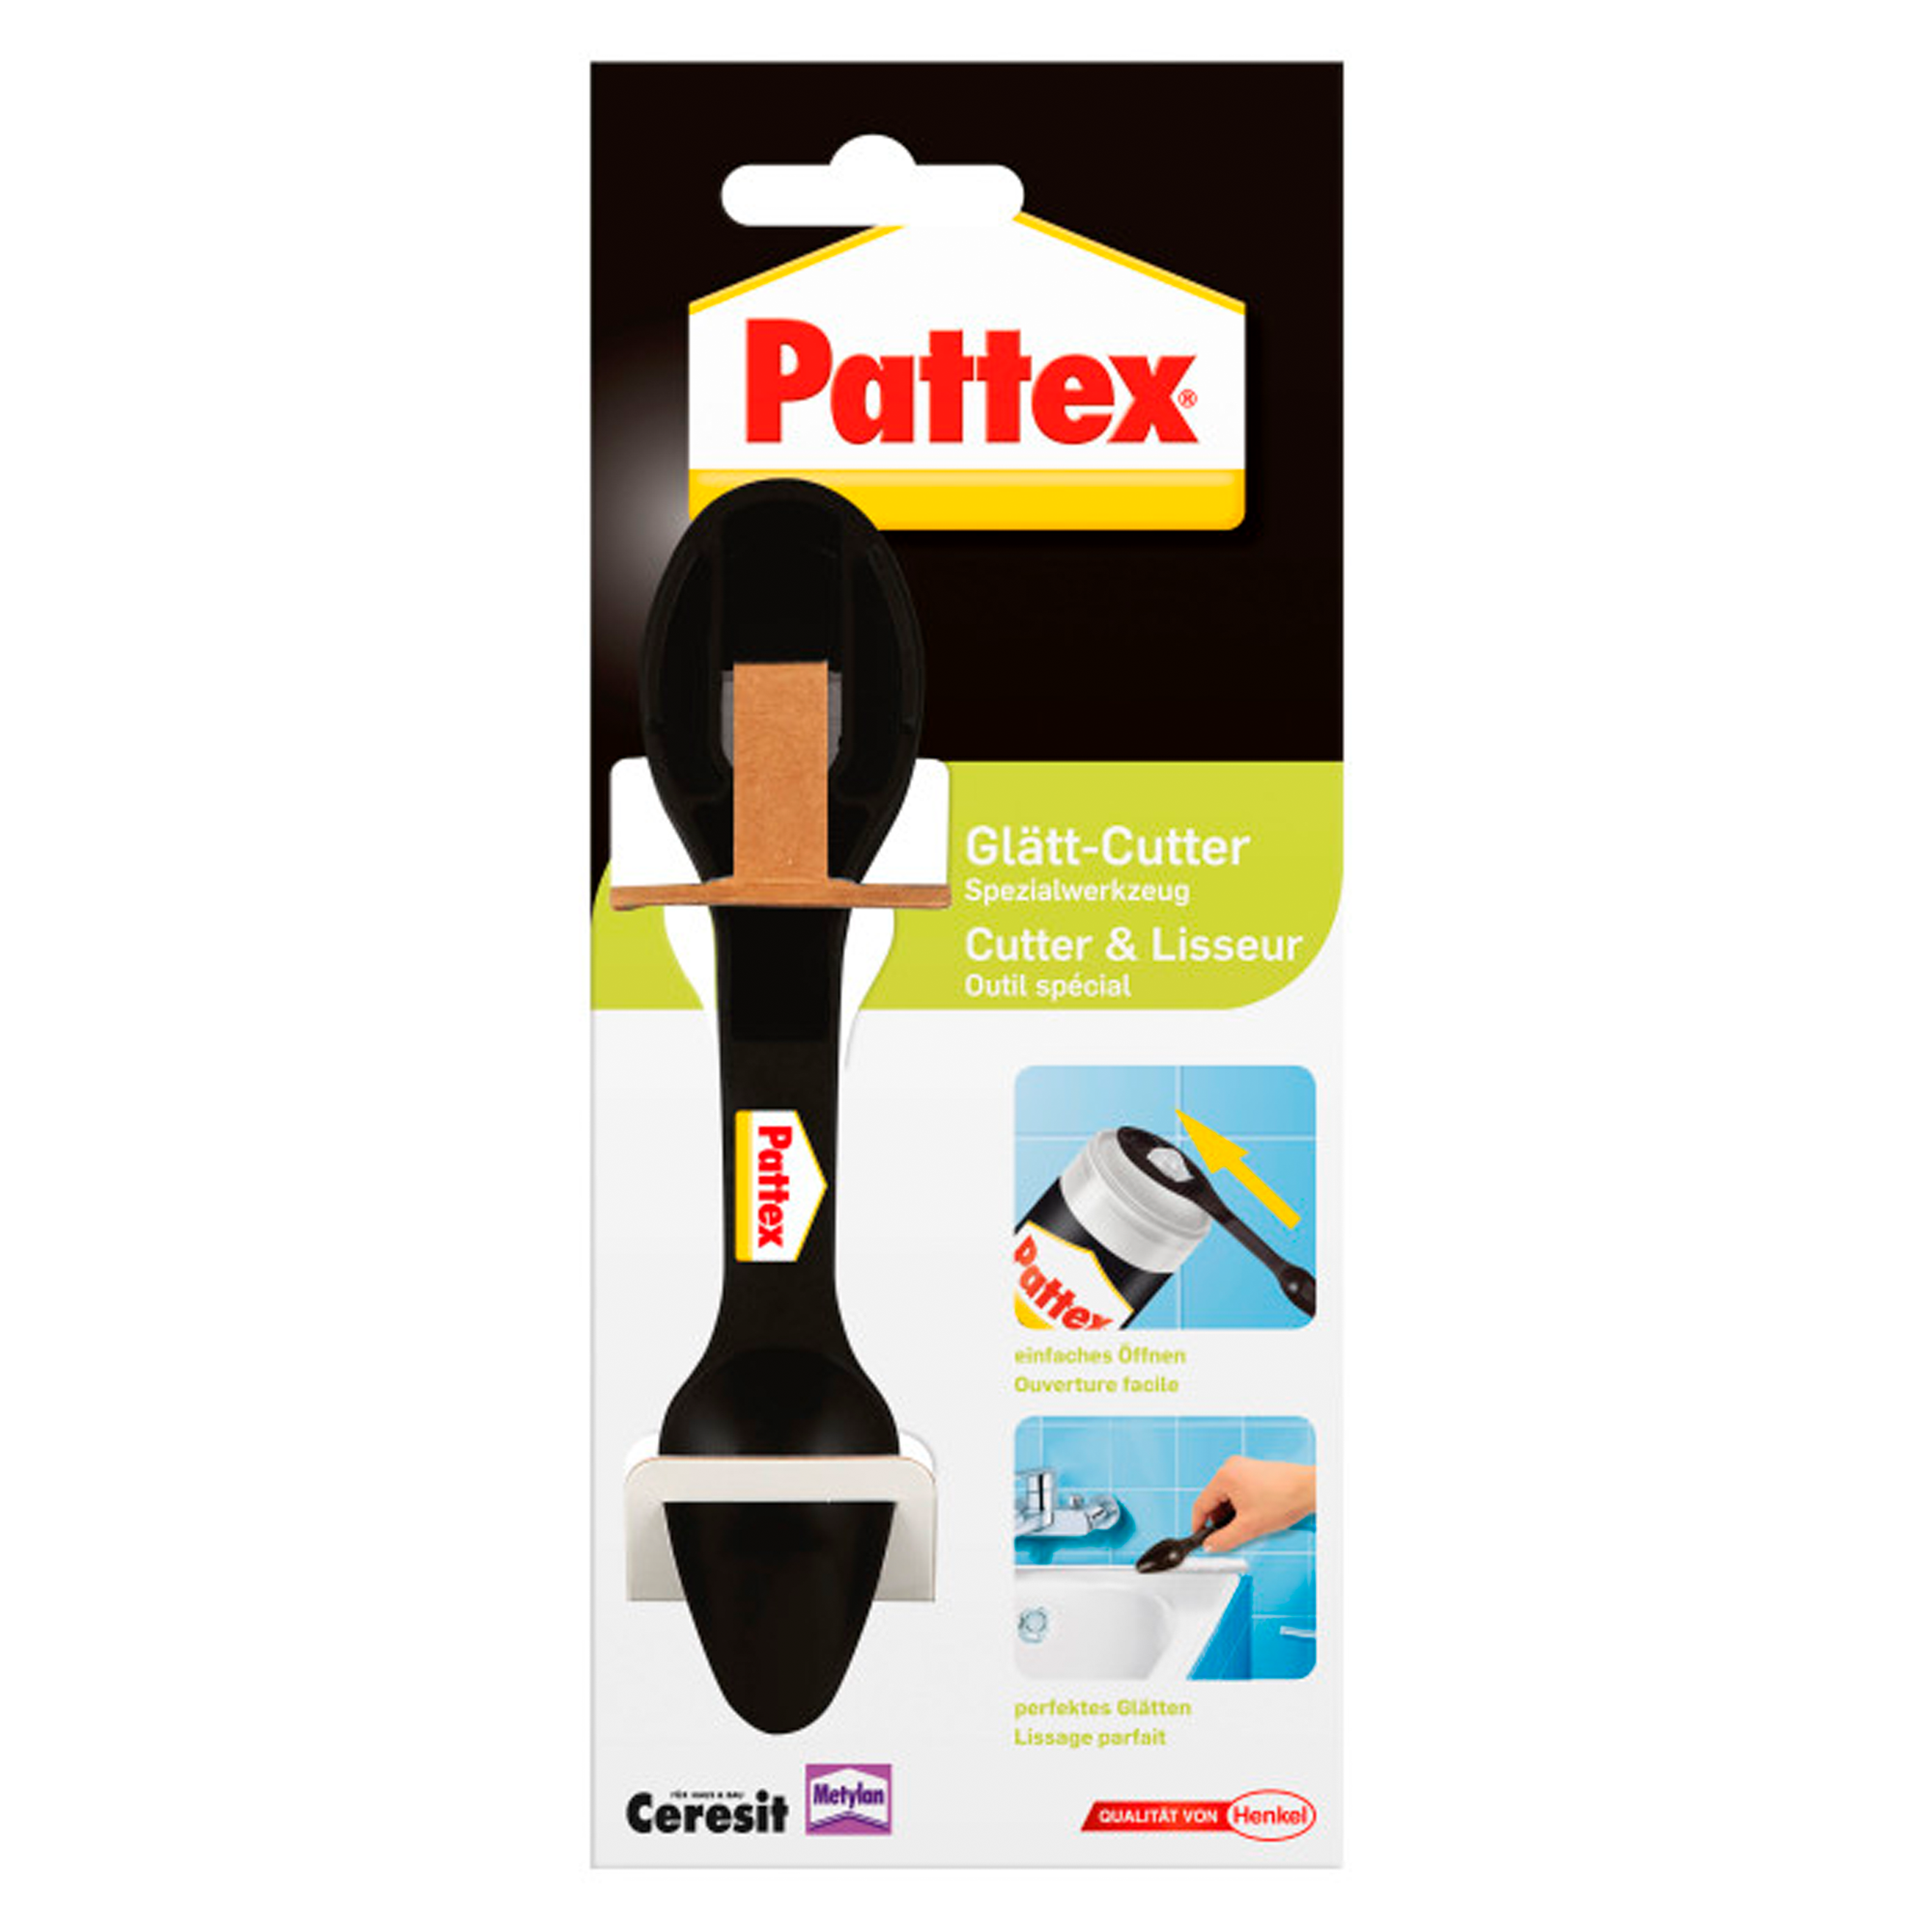 Pattex Glättcutter + product picture